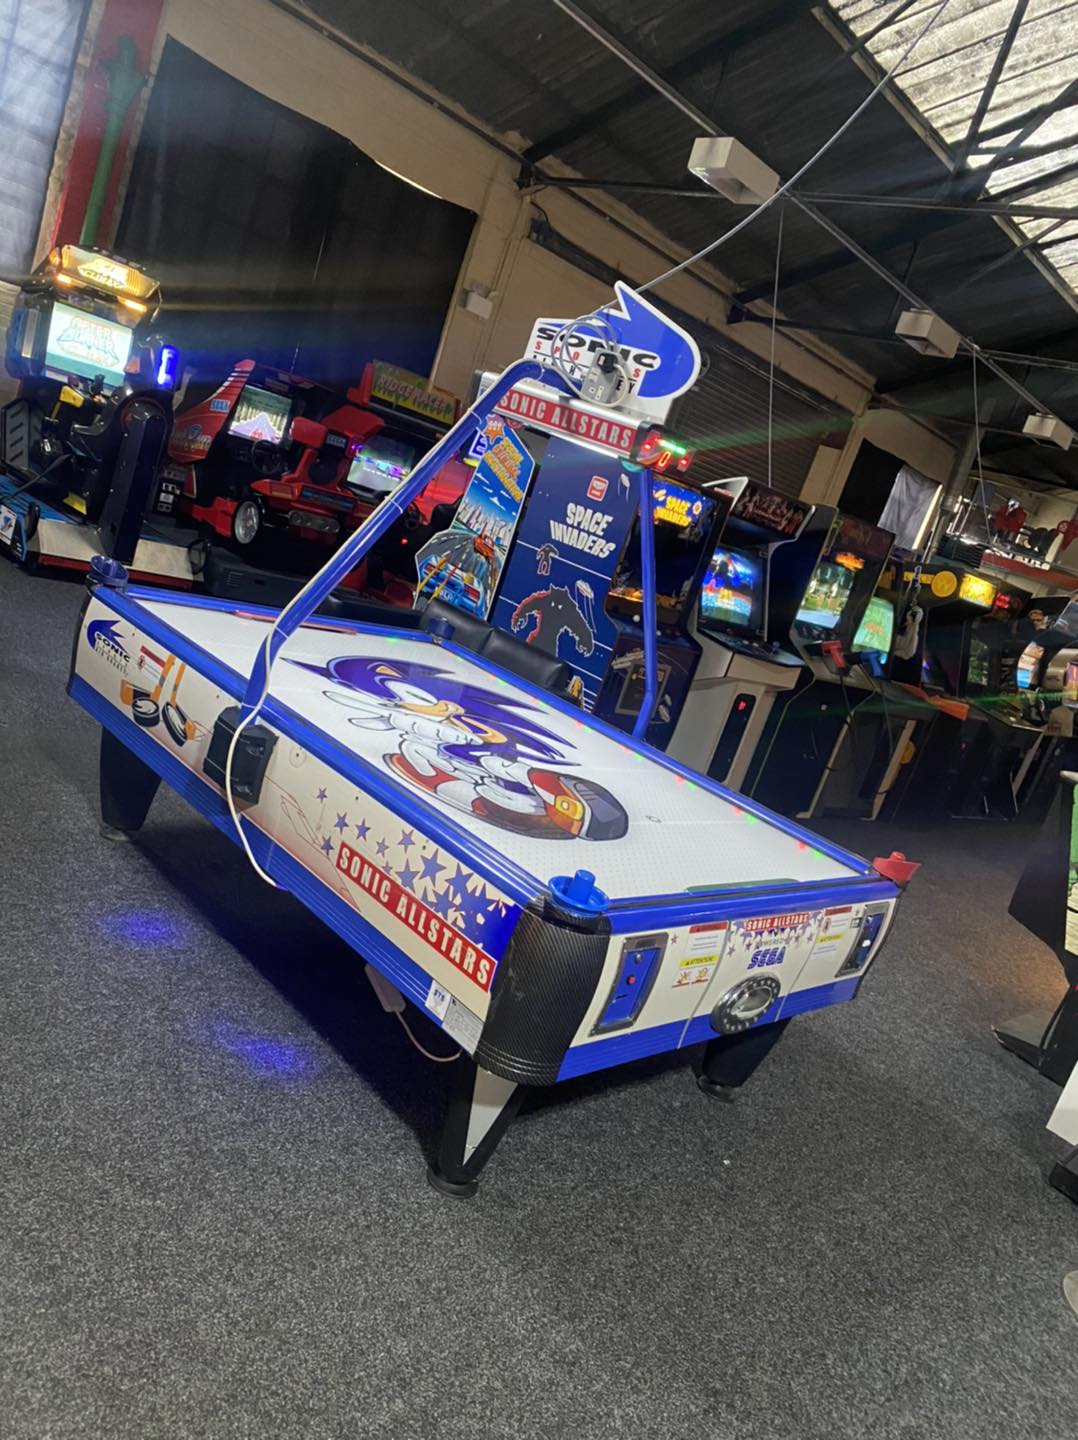 gaming arcades in yorkshire